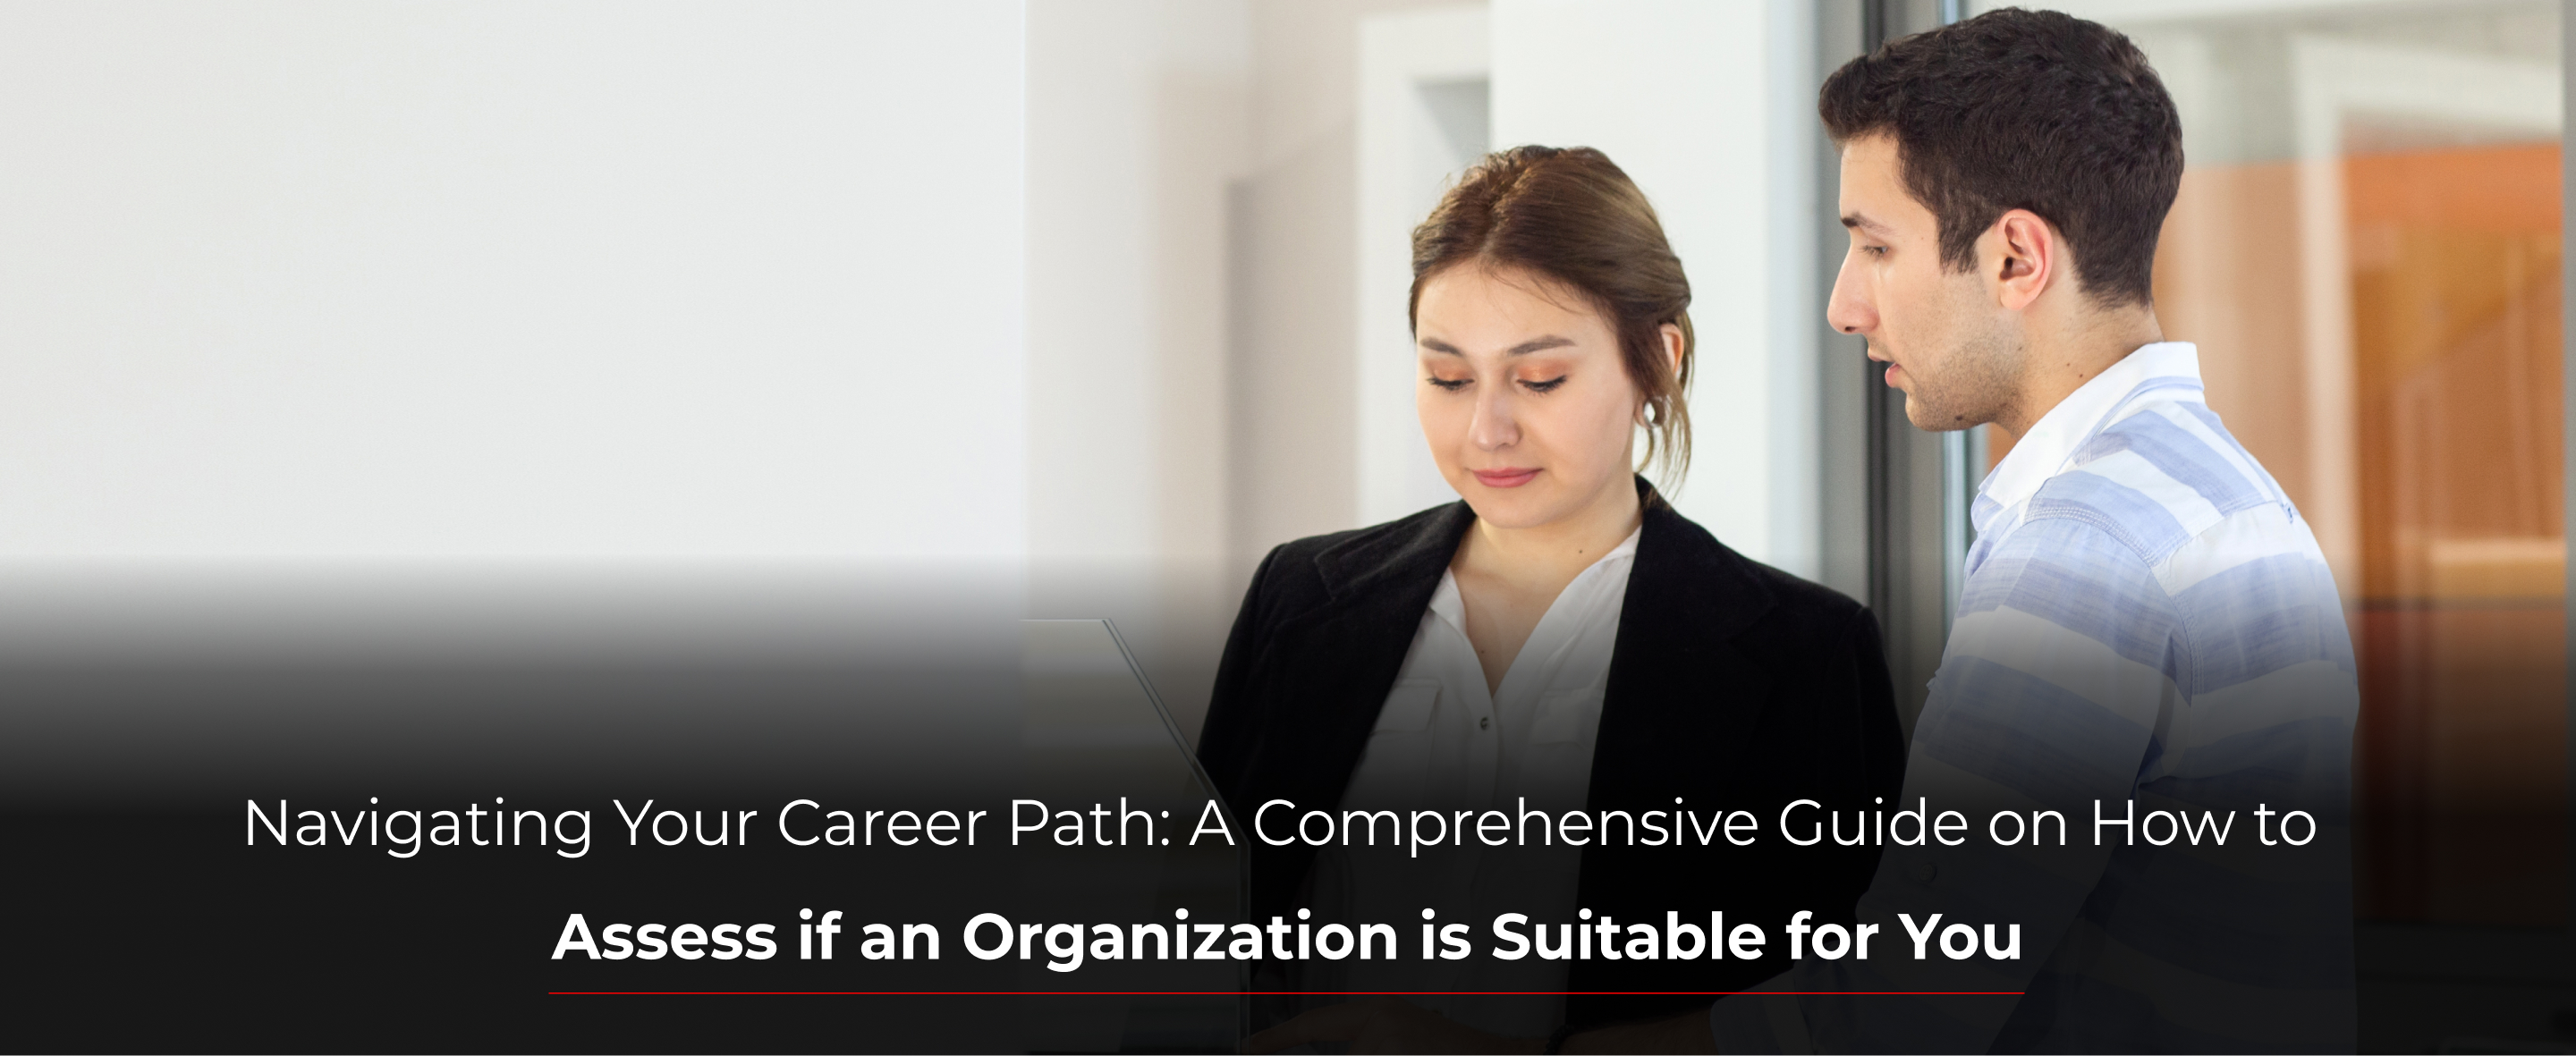 Navigating Your Career Path: A Comprehensive Guide on How to Assess if an Organization is Suitable for You